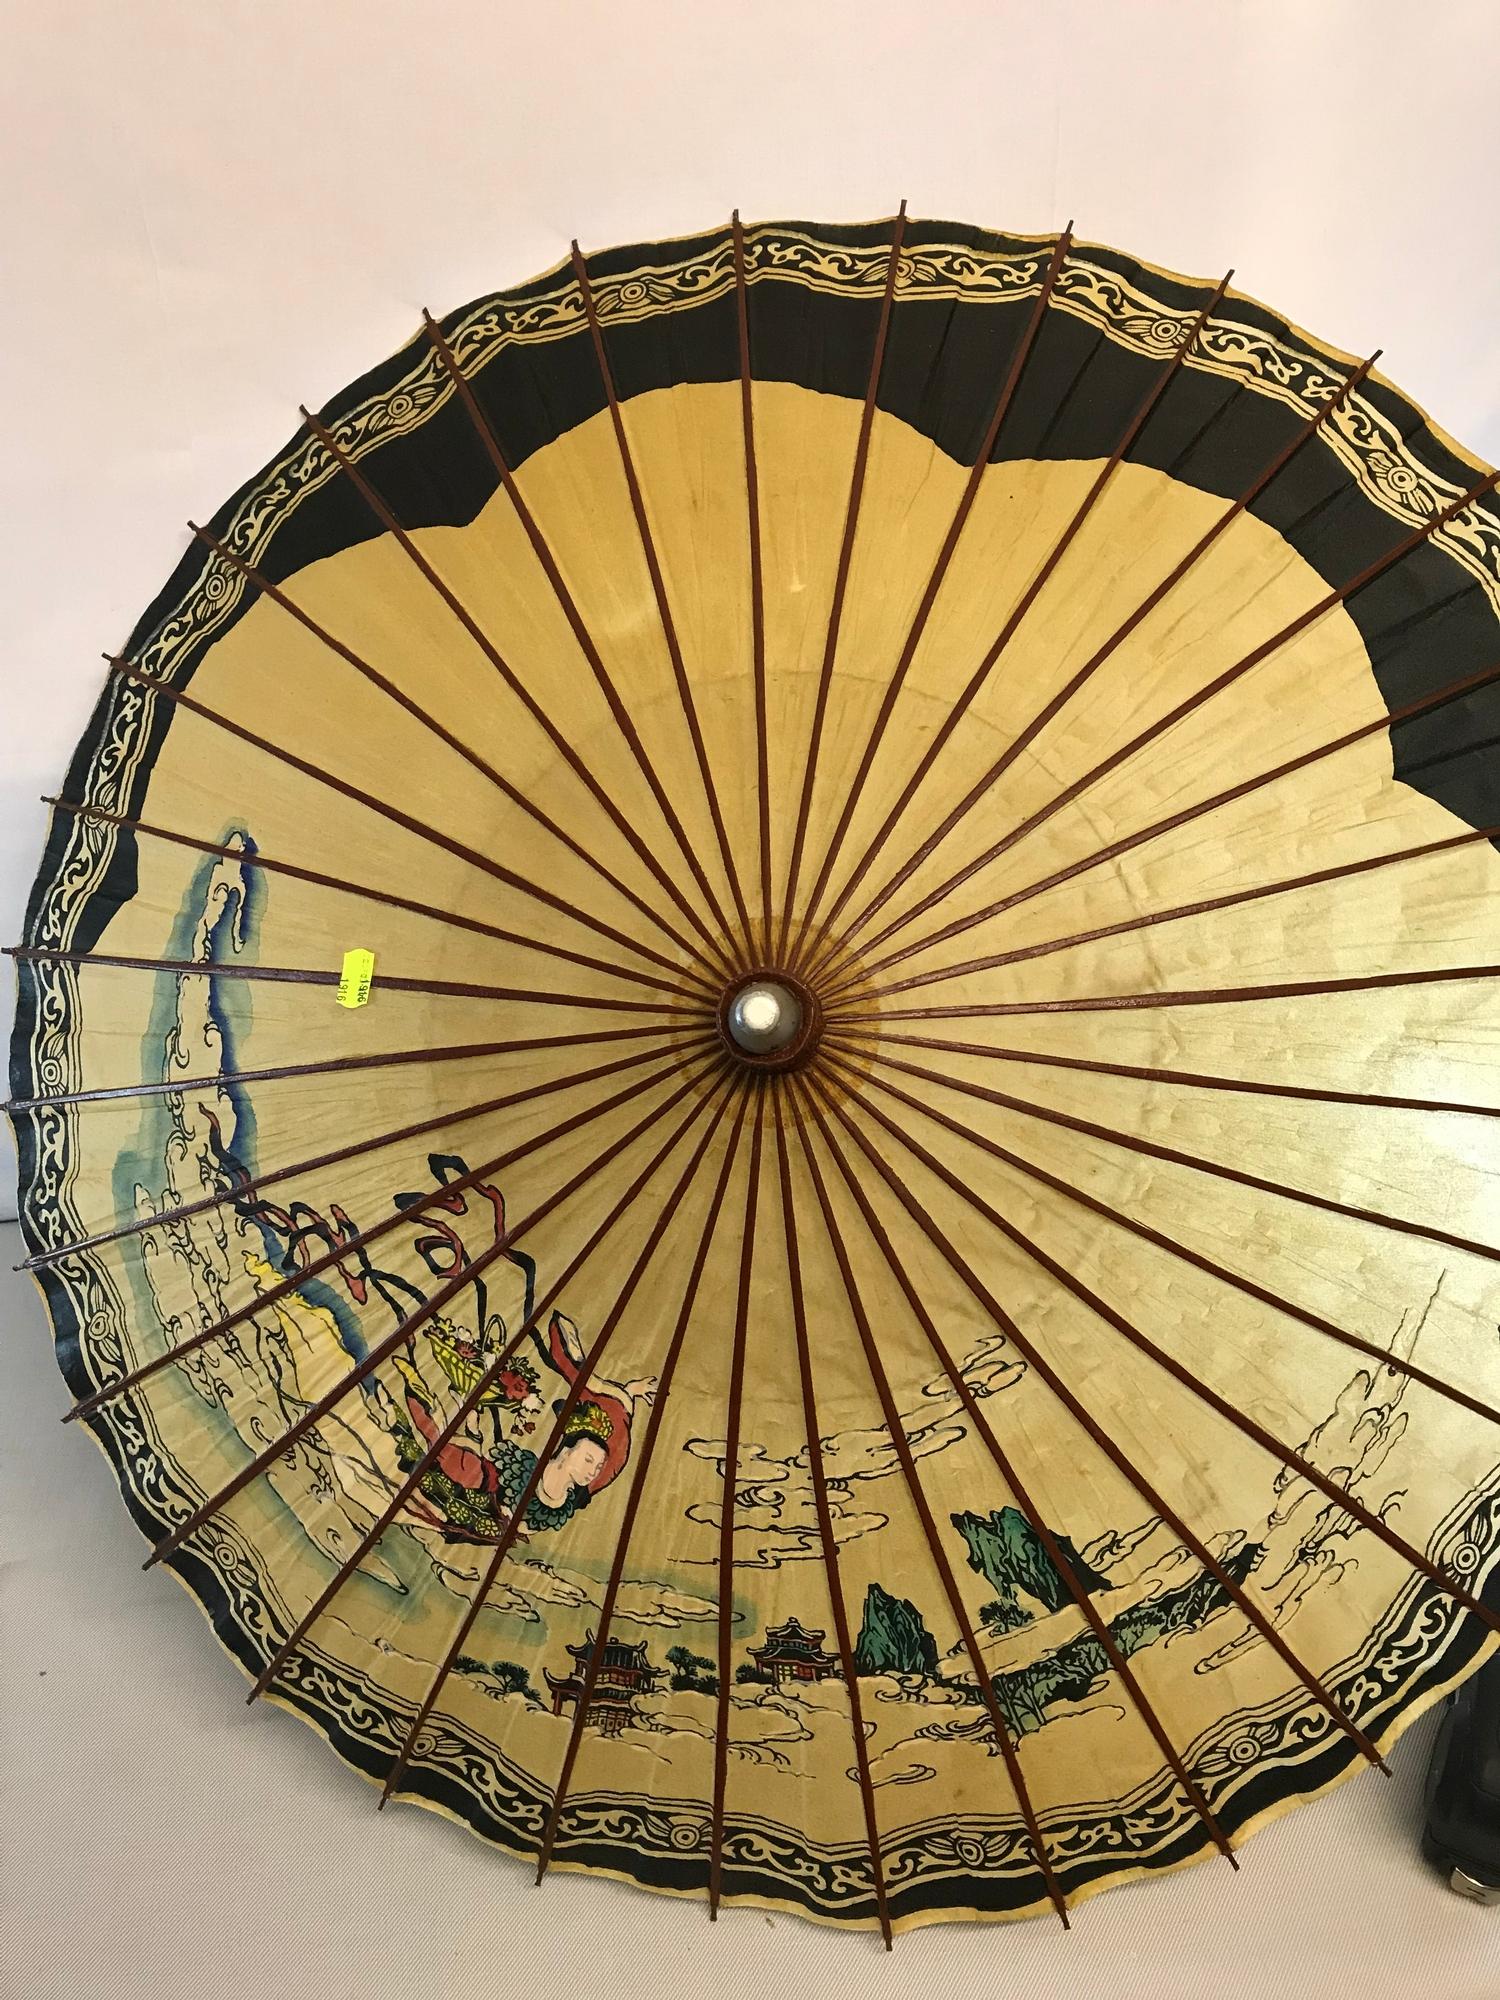 2 Oriental Parasols. One is hand painted with geishas and the other is embroidered with flowers,